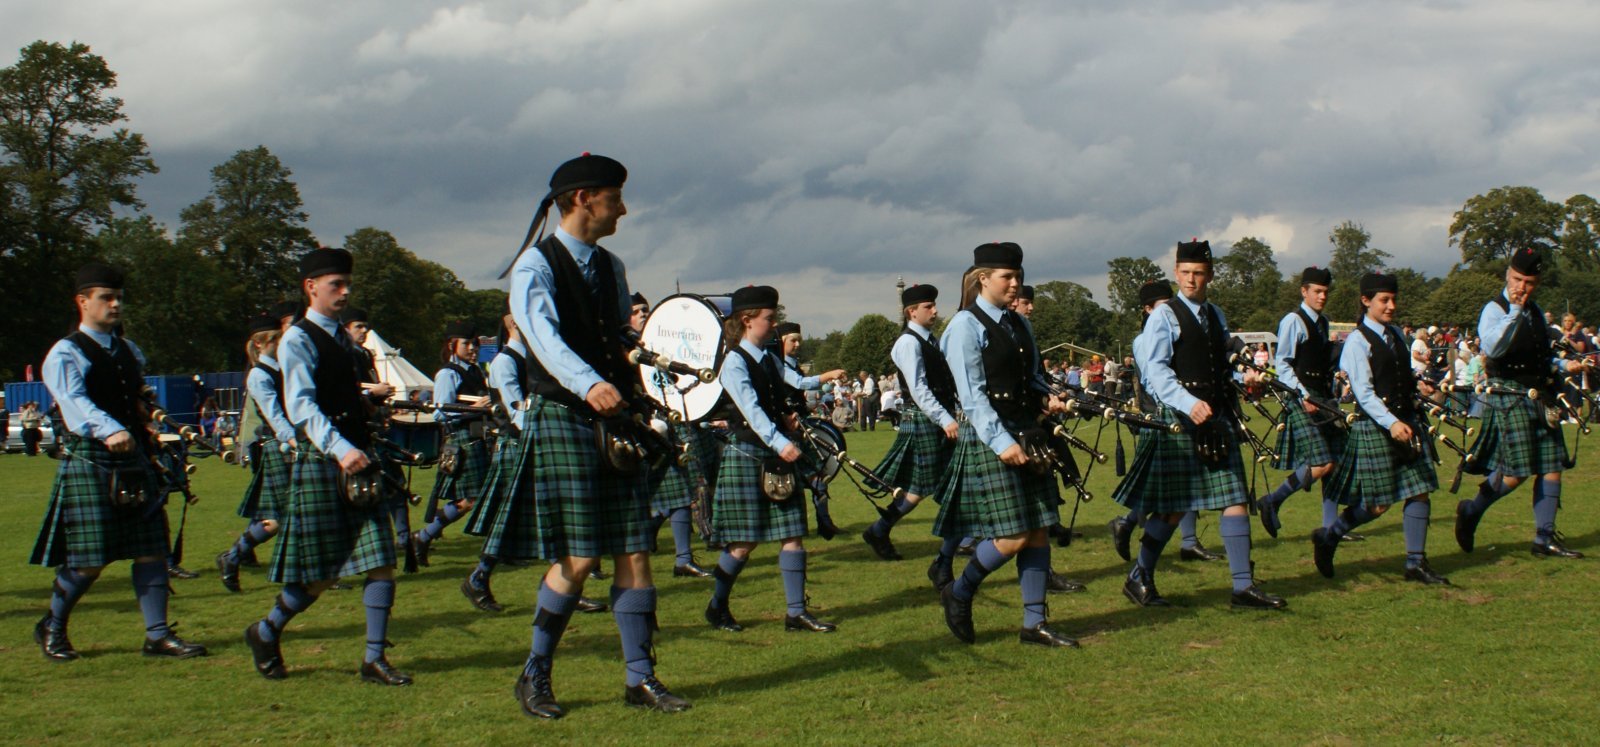 [Photograph+Pipe+Bands+On+The+March+Perth+Scotland+03.jpg]